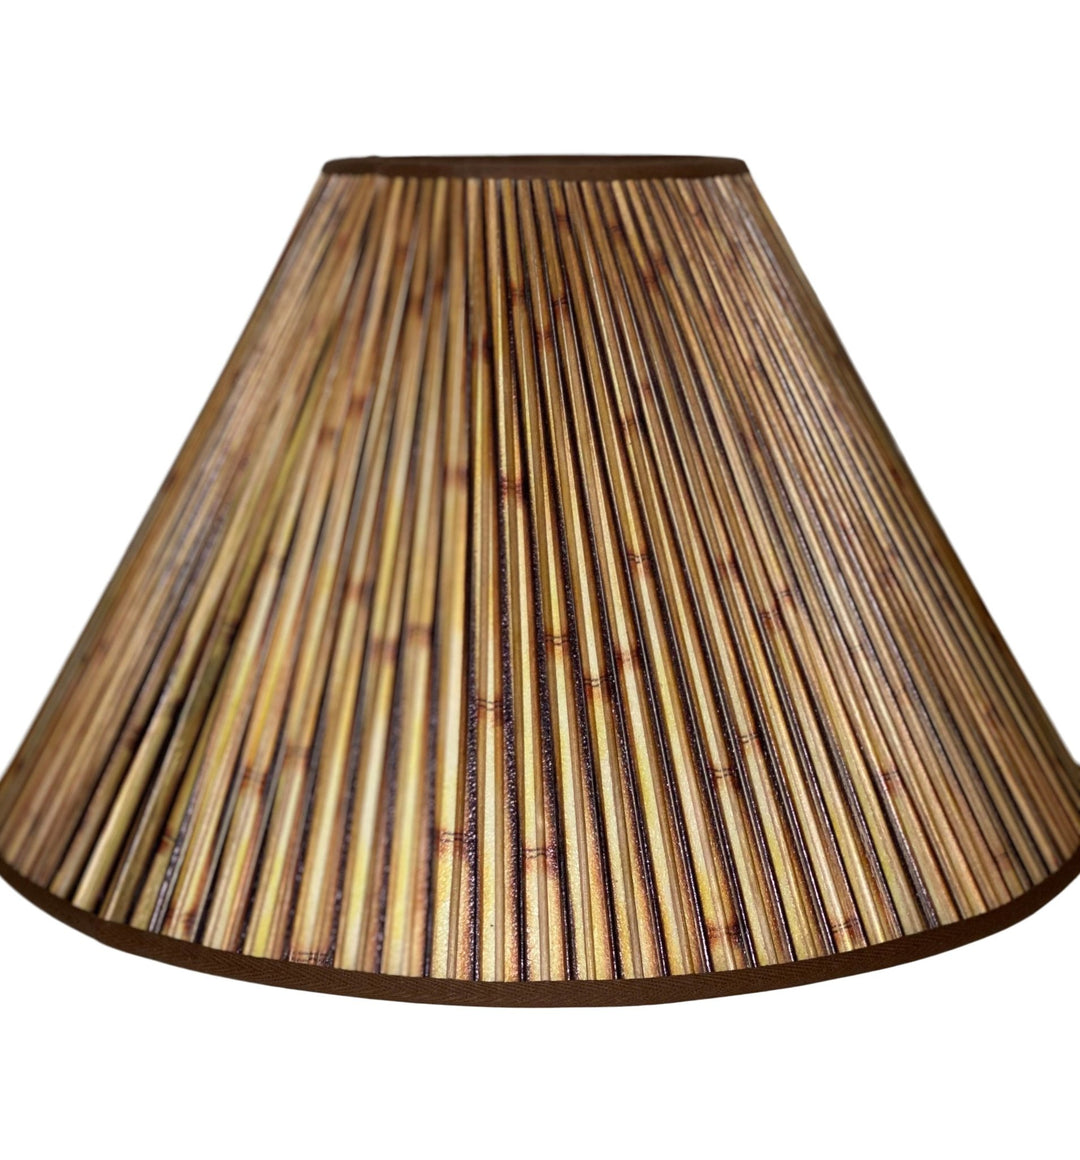 Imprinted Bamboo Lampshades made with Wood Sticks - Available in multiple sizes - Lux Lamp Shades